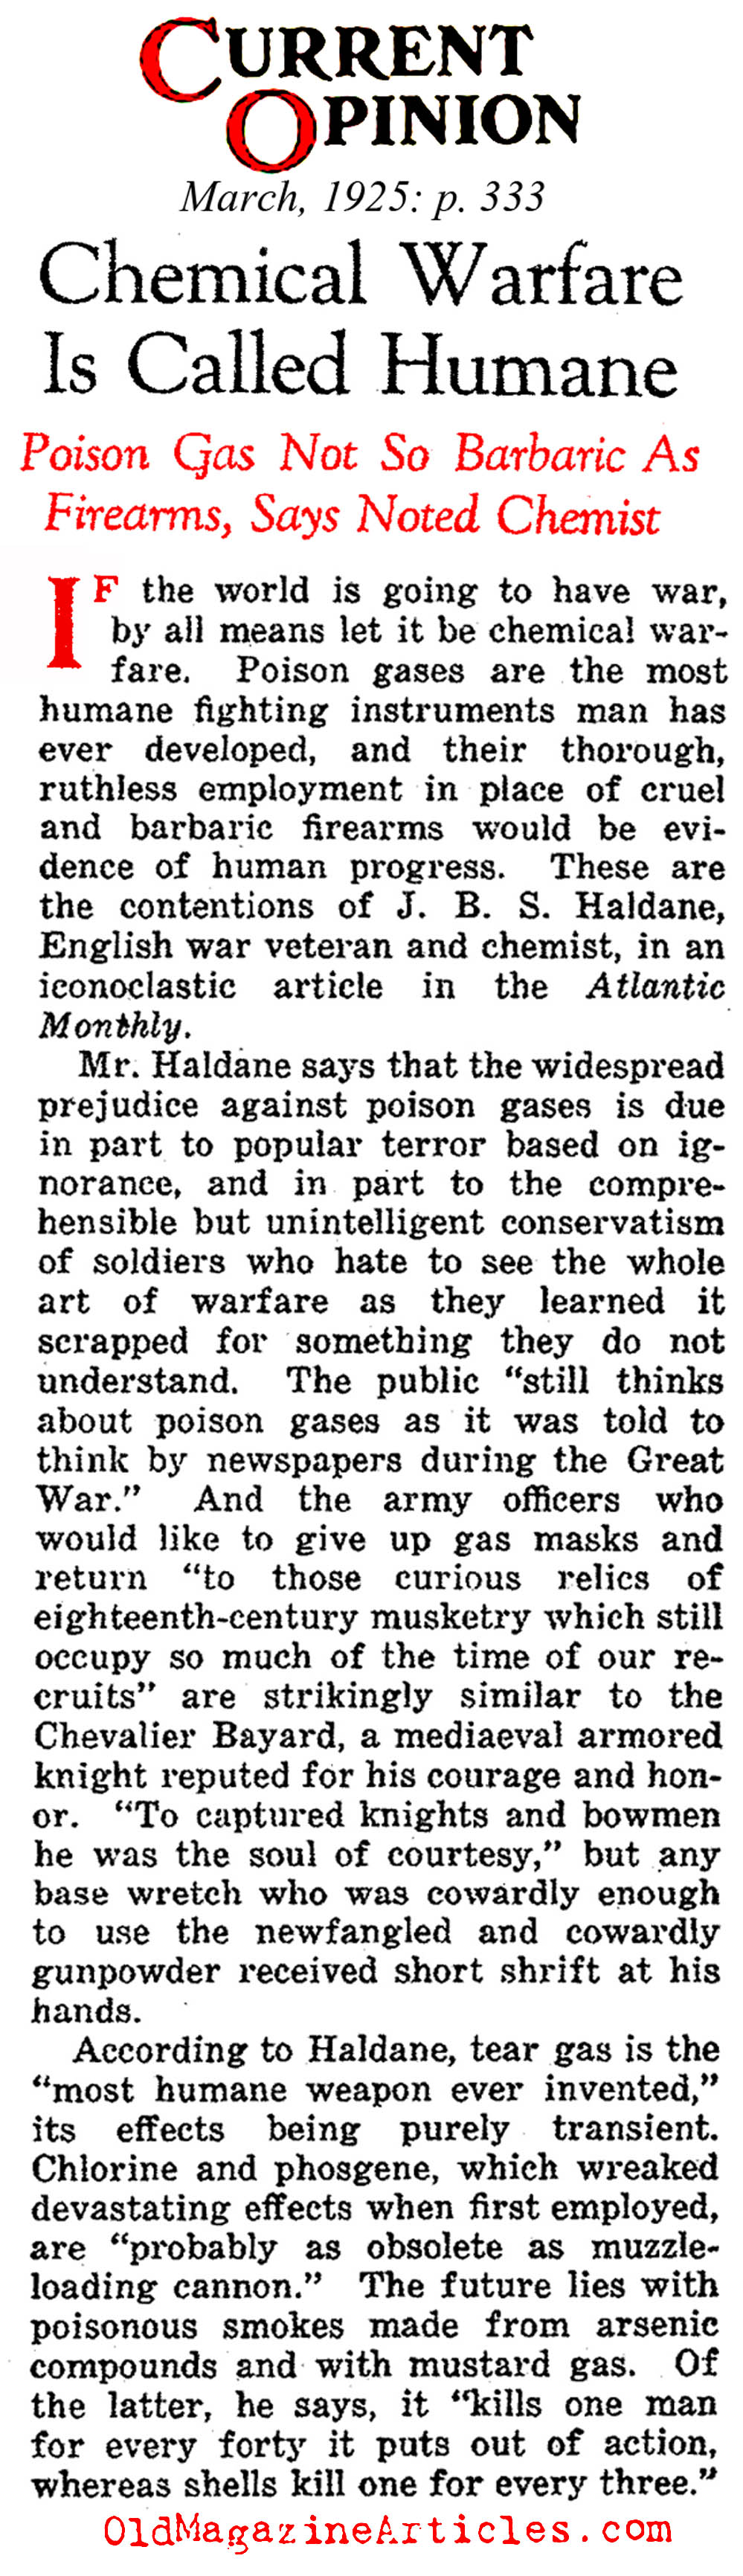 Reconsidering Poison Gas as a Weapon (Current Opinion, 1925)